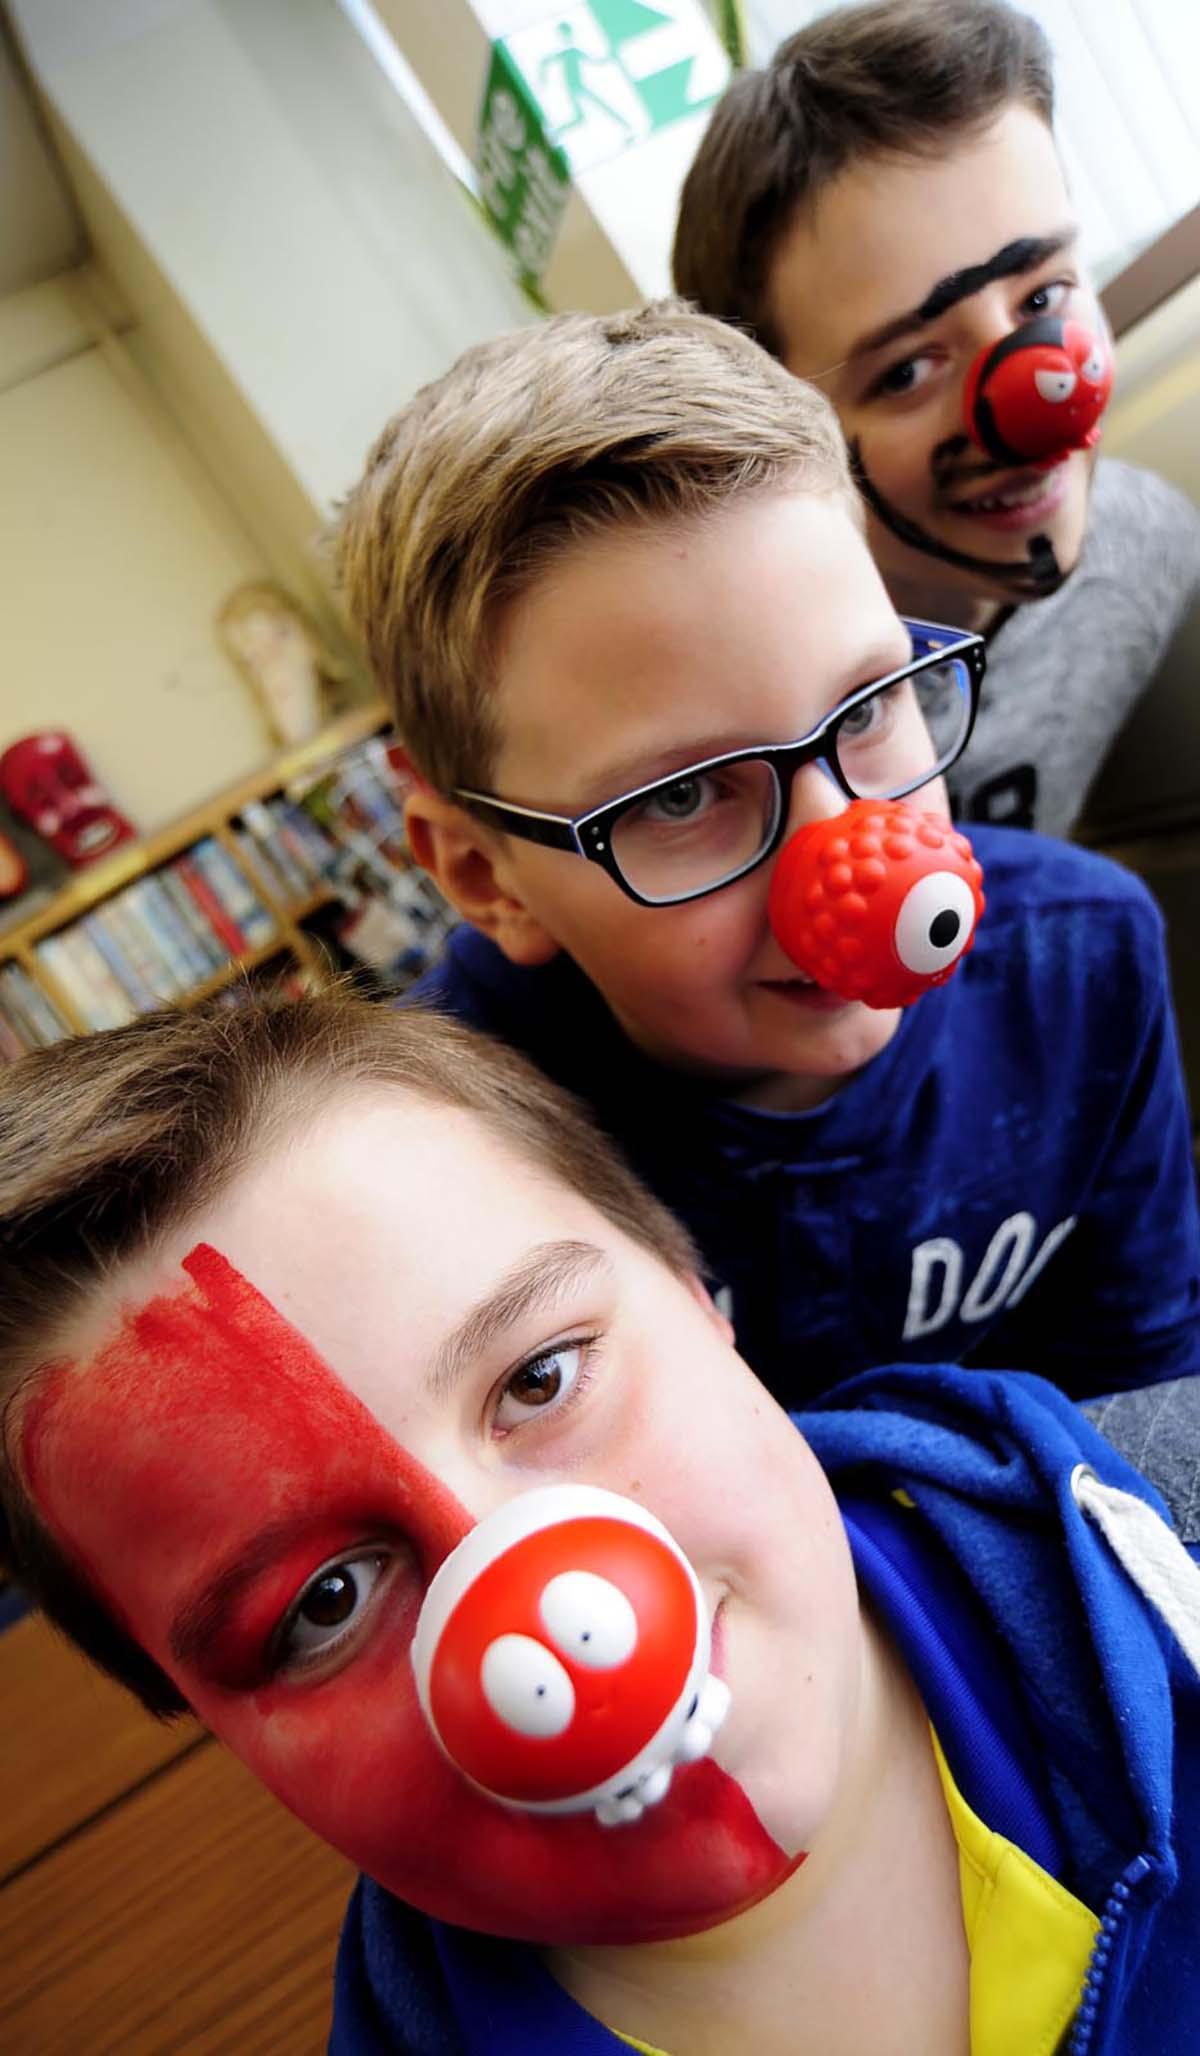  Comic Relief / Red Nose Day 2015 events across Oxfordshire IN PICTURES